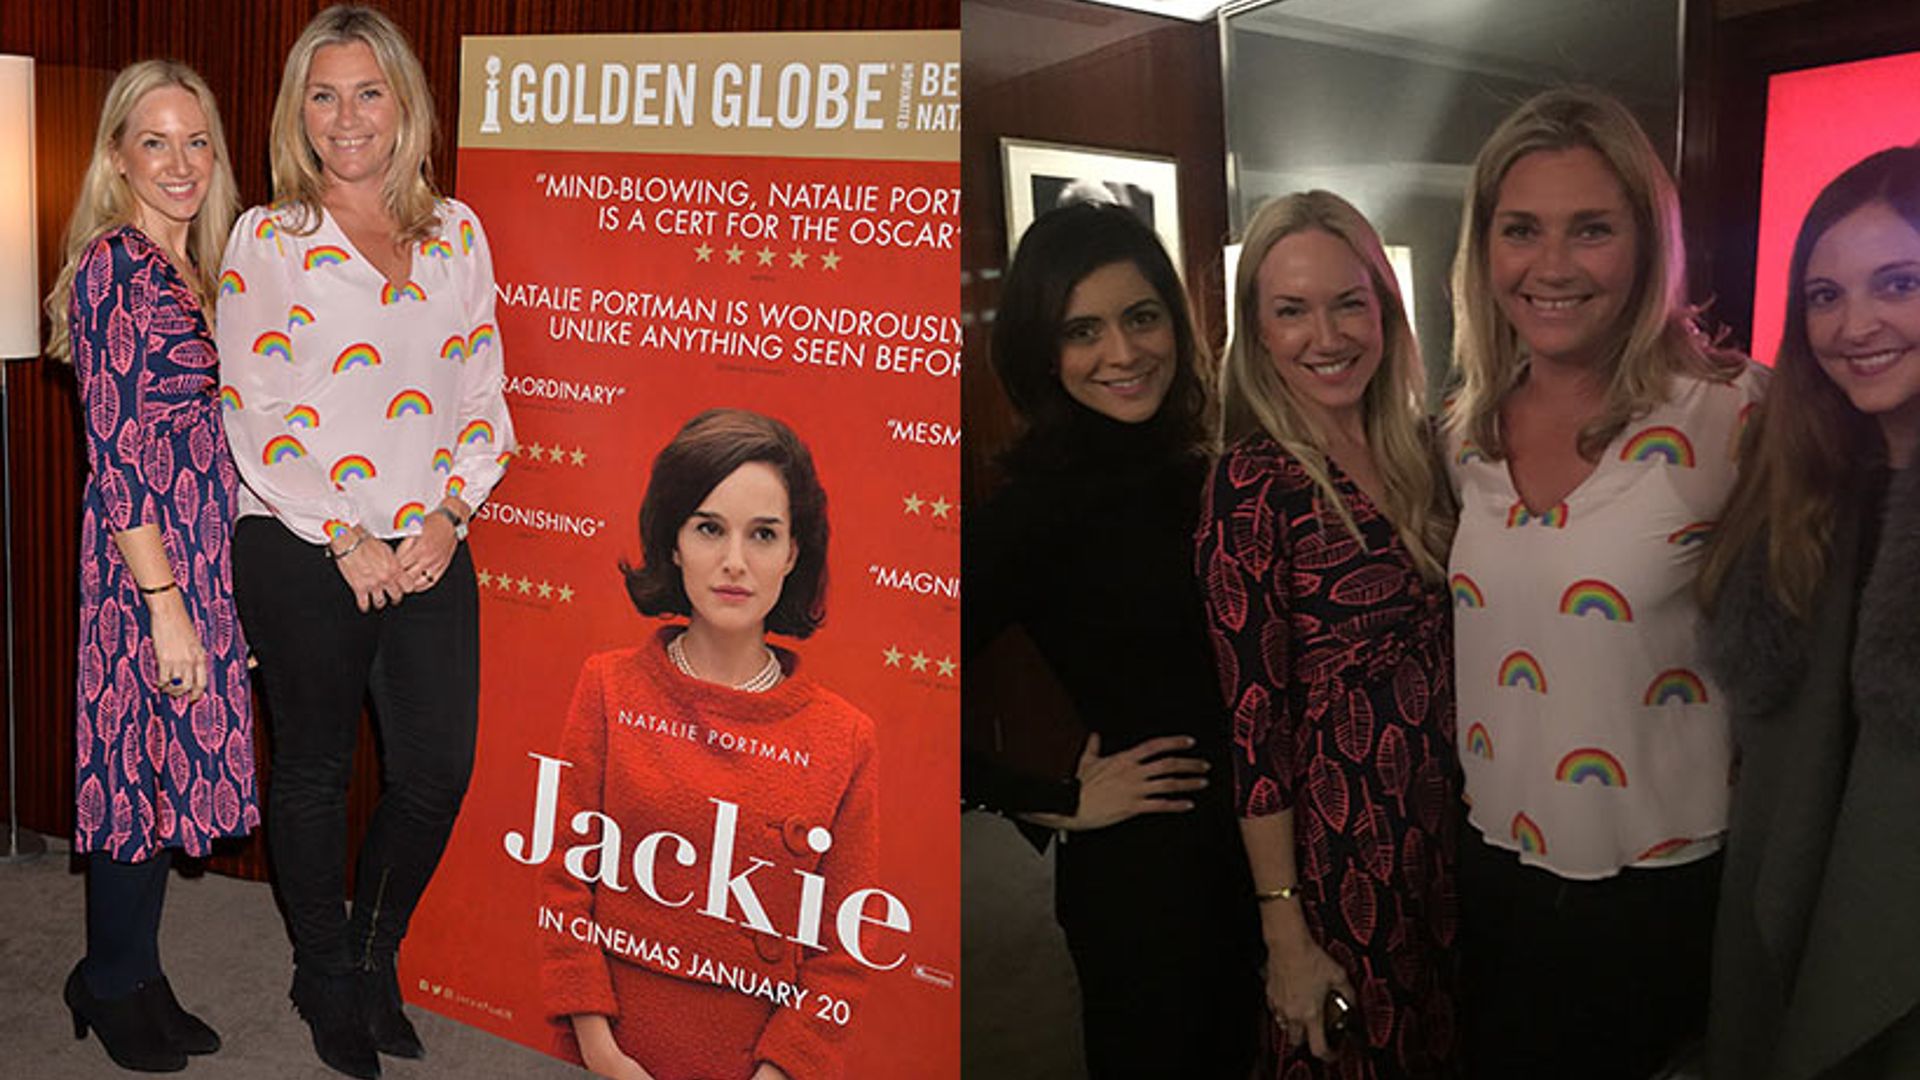 VIP guests join HELLO! for exclusive screening of Natalie Portman's new film JACKIE